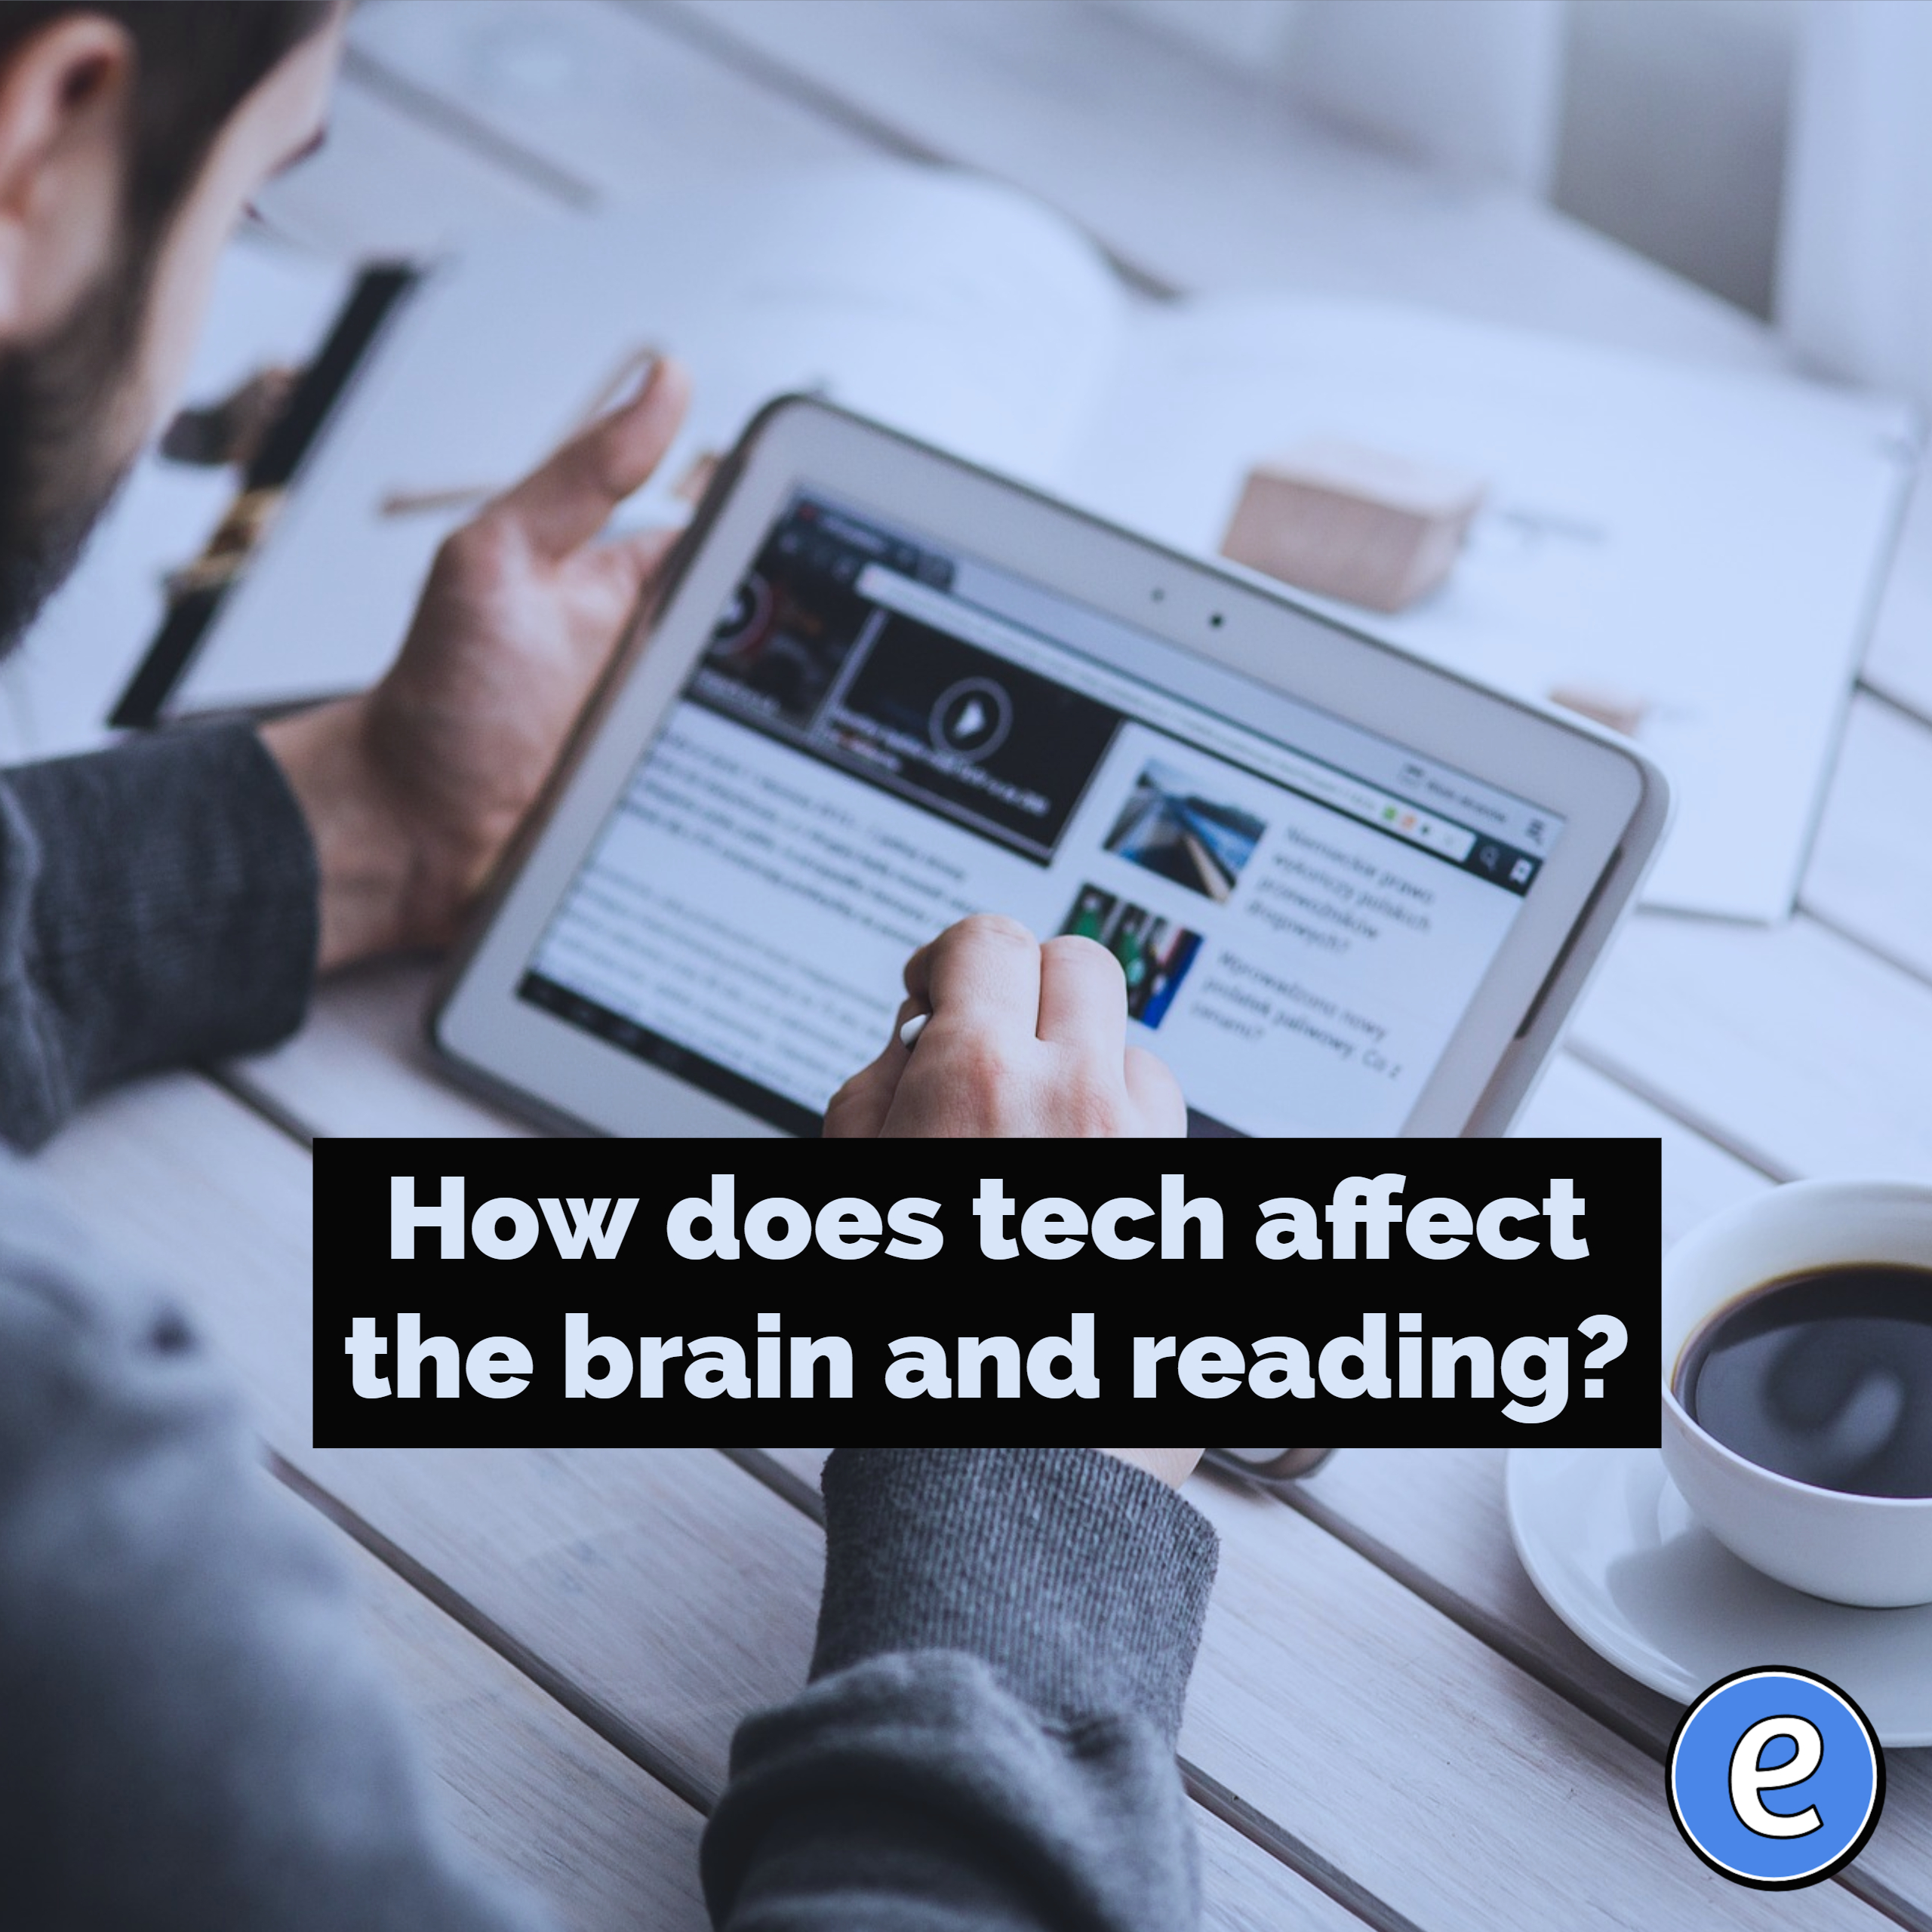 How does tech affect the brain and reading?